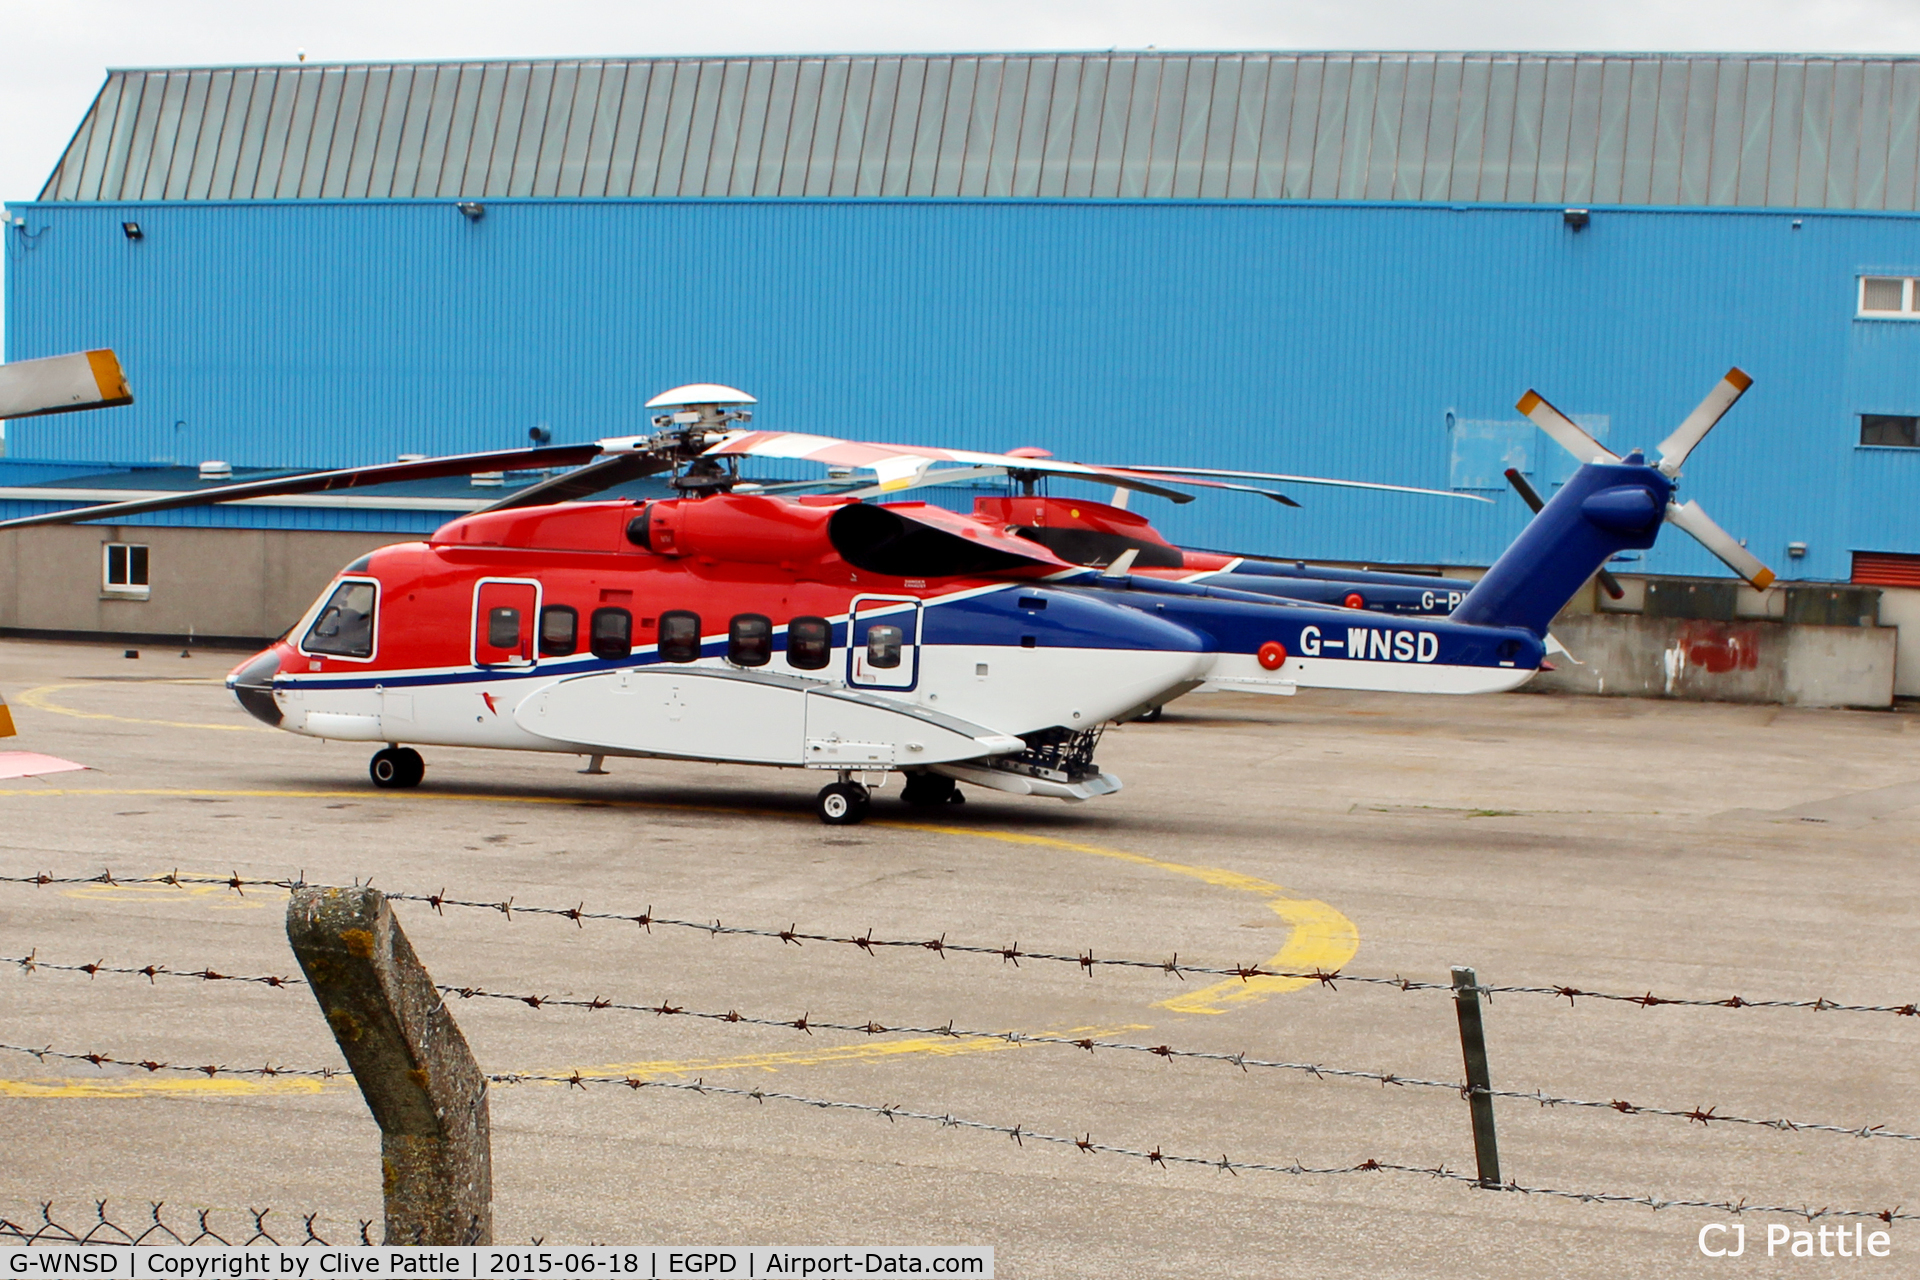 G-WNSD, 2014 Sikorsky S-92A C/N 920231, In action at Aberdeen Airport, Scotland EGPD